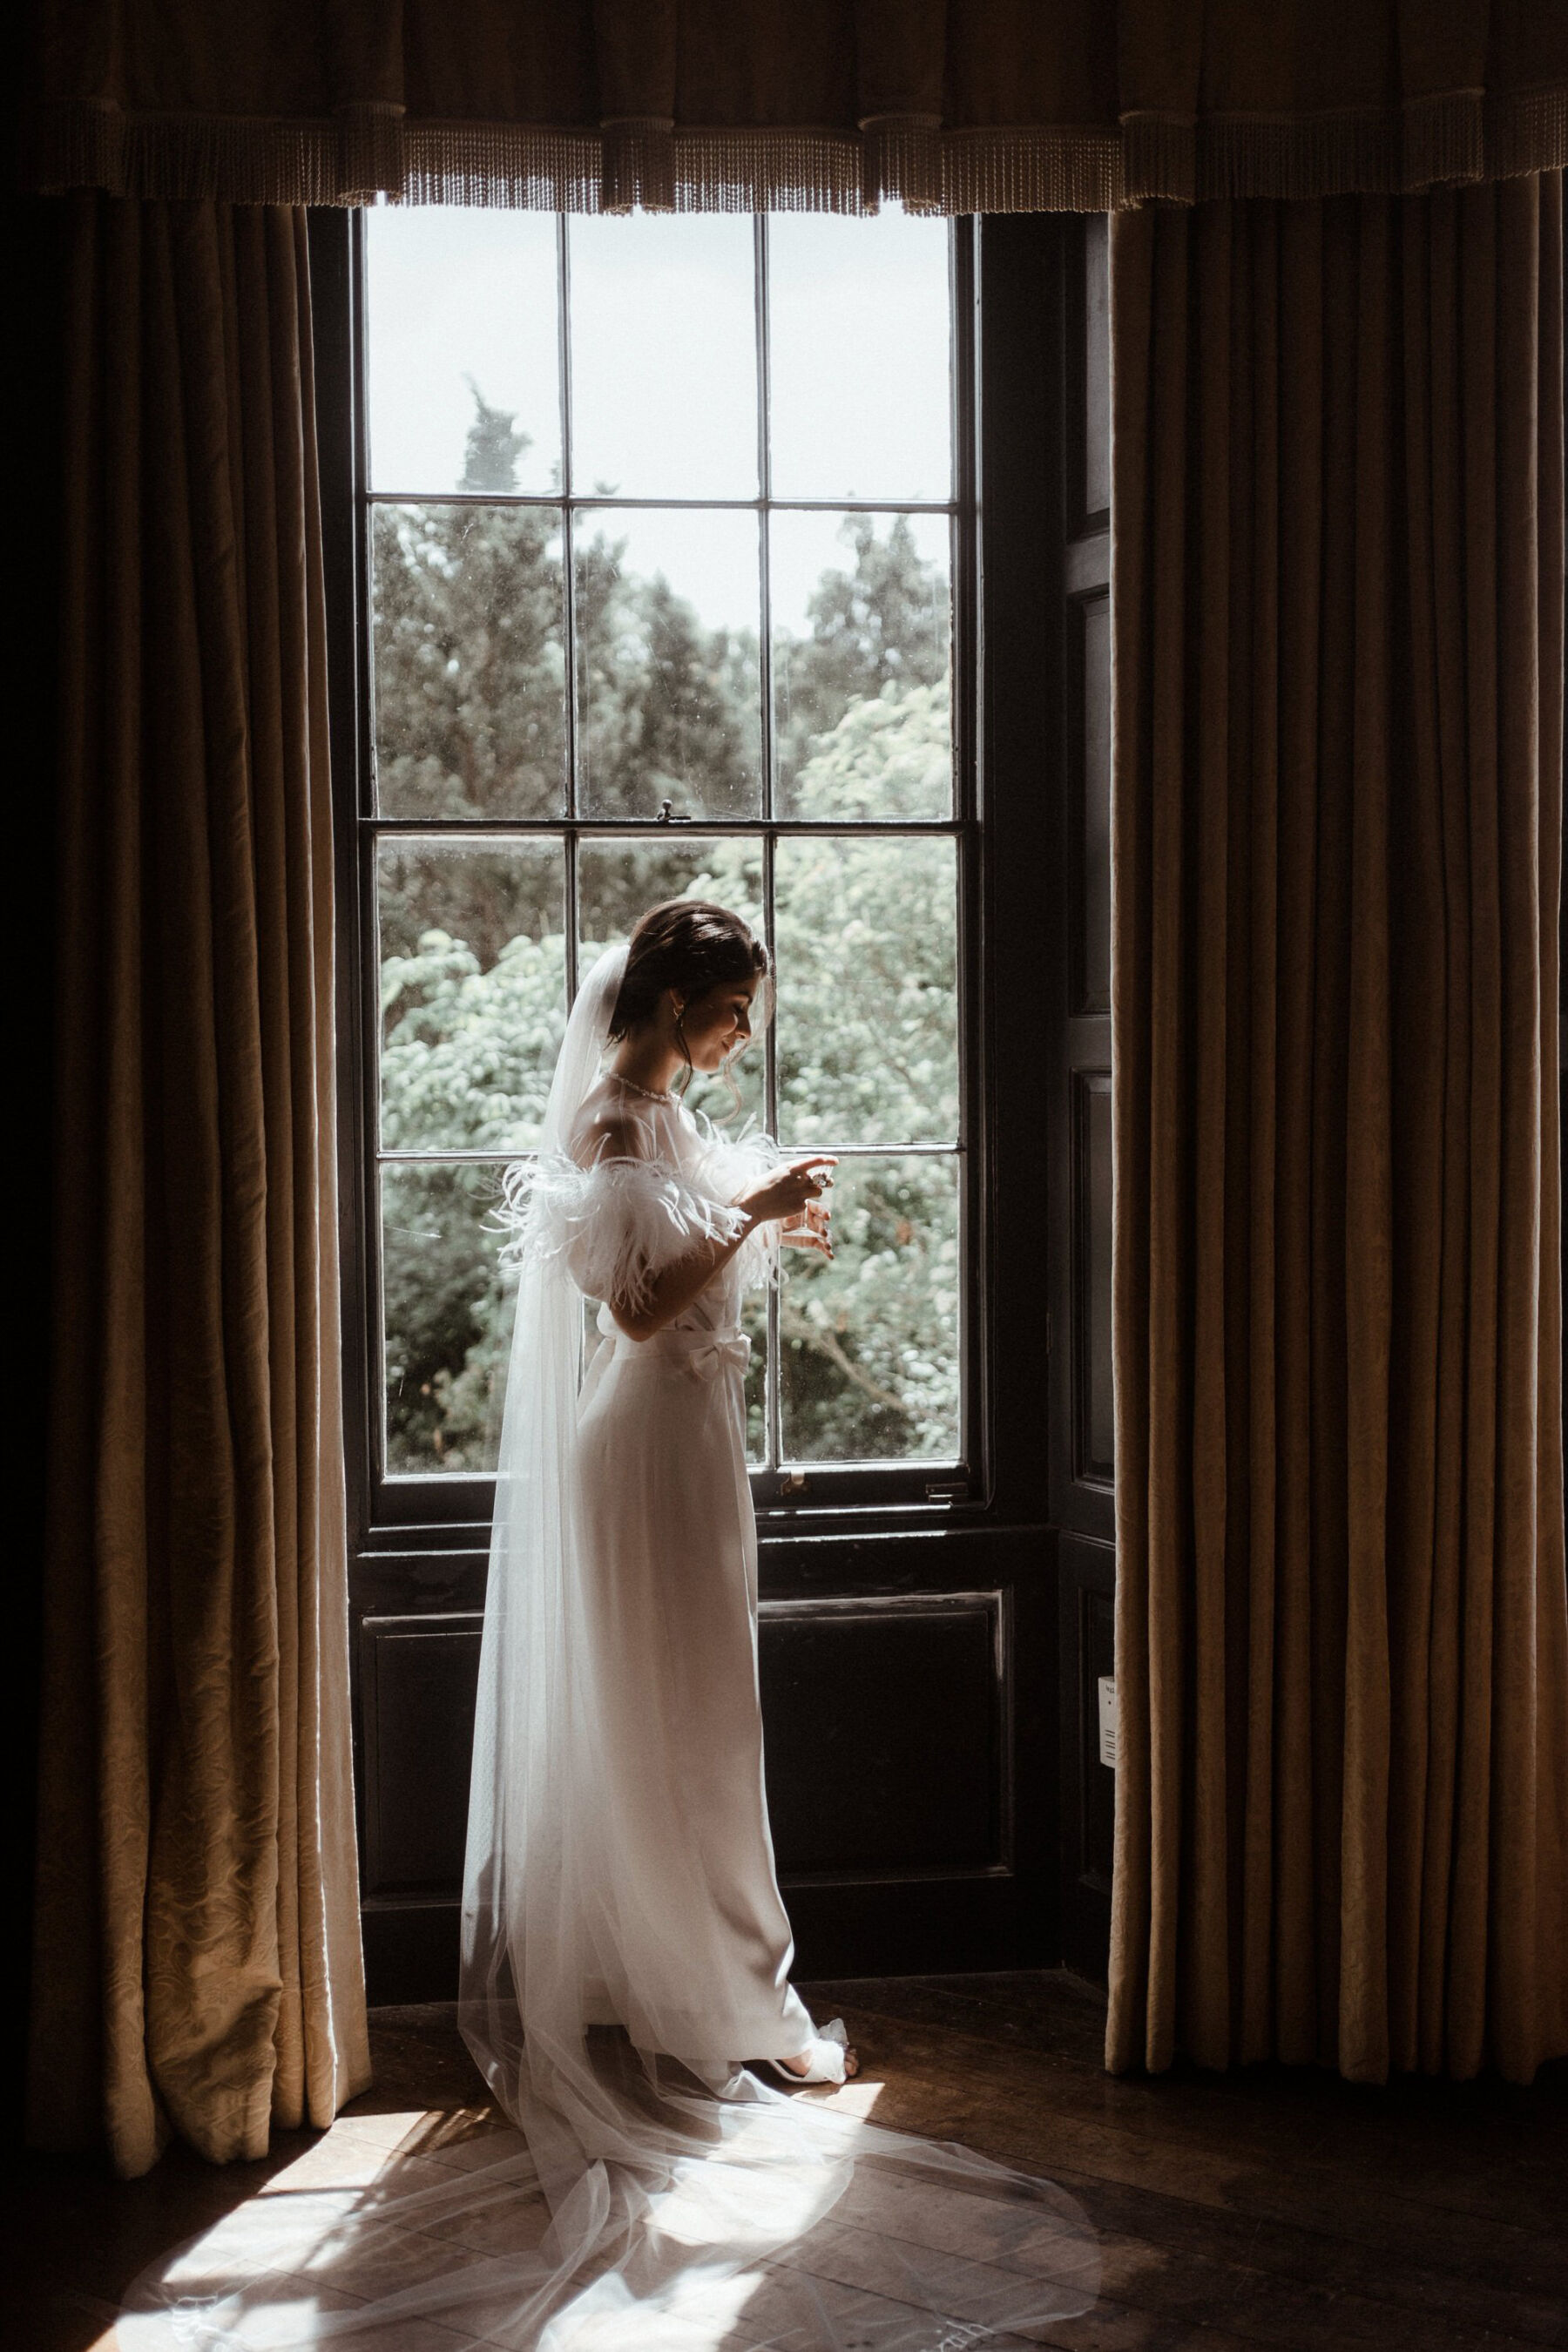 Bride standing in a window at Elmore Court, wearing Wilden London trousers and embroidered veil by Rebecca Anne Designs.